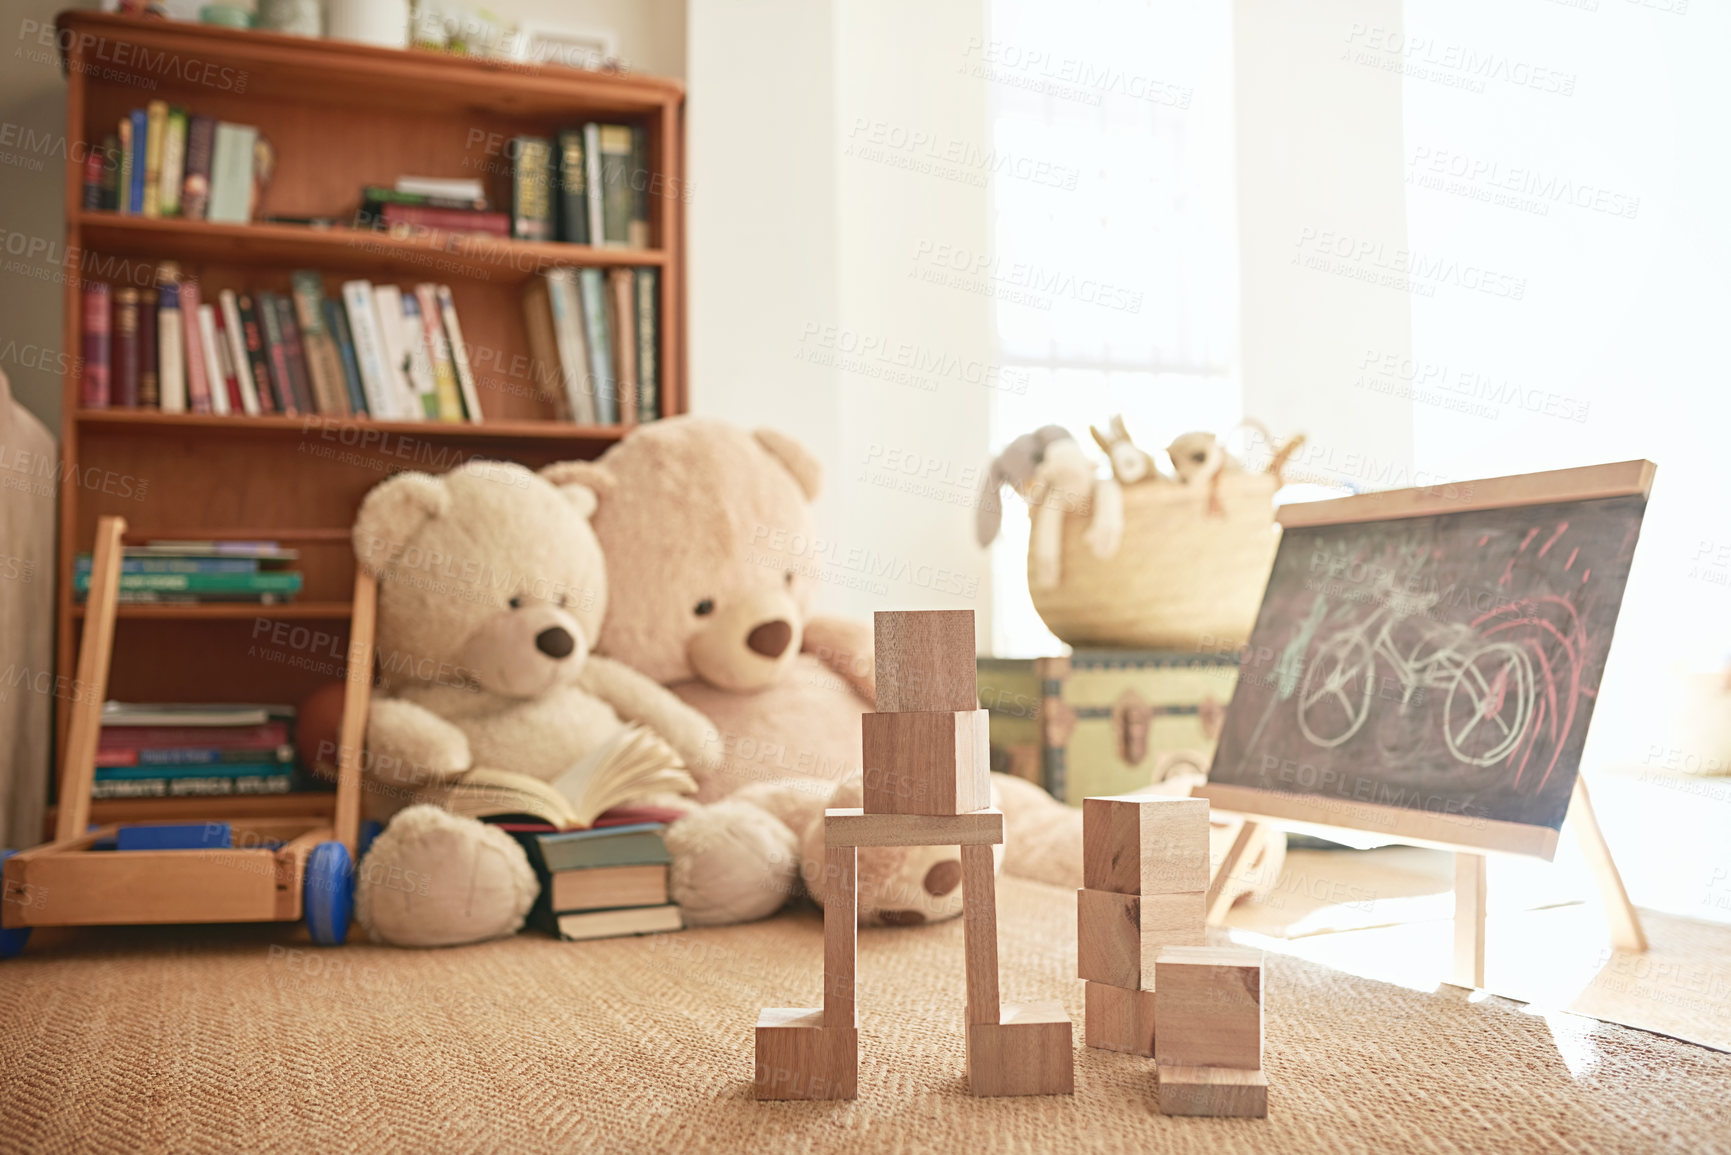 Buy stock photo Shot of a playroom filled with toys